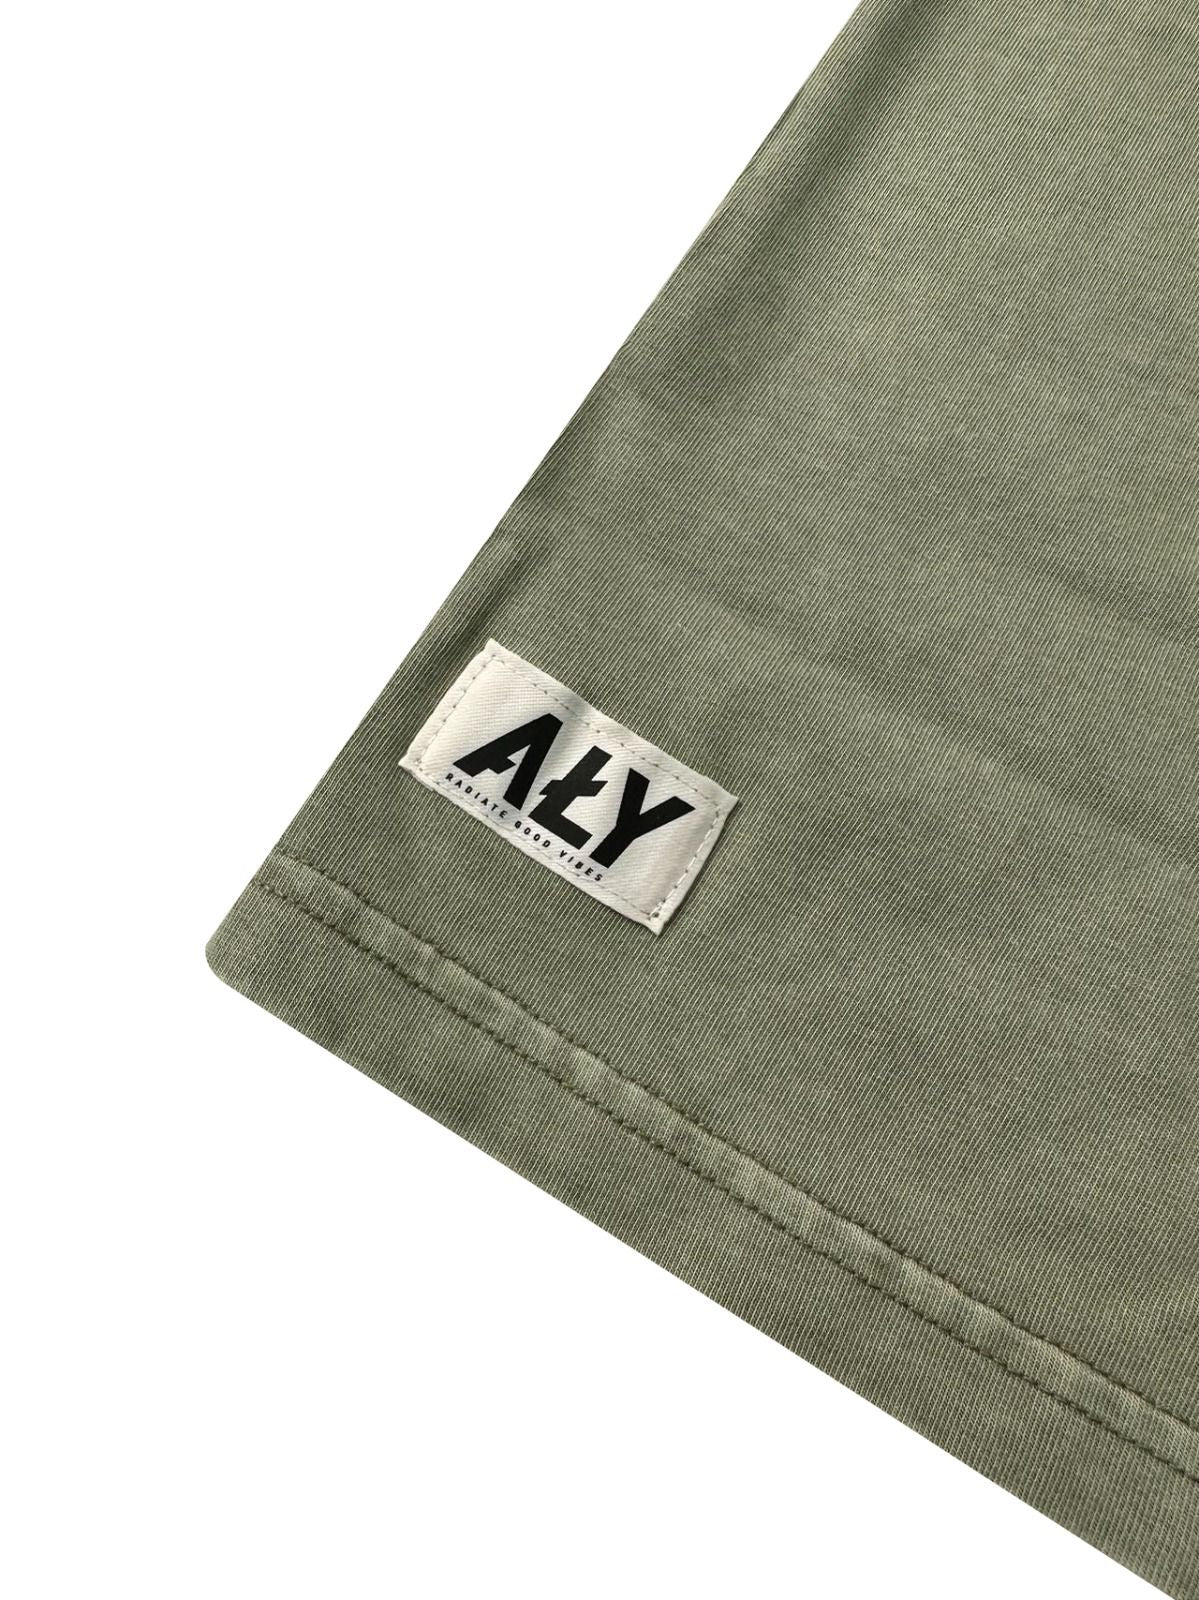 Aly Good Vibes - Washed Tee (Olive)